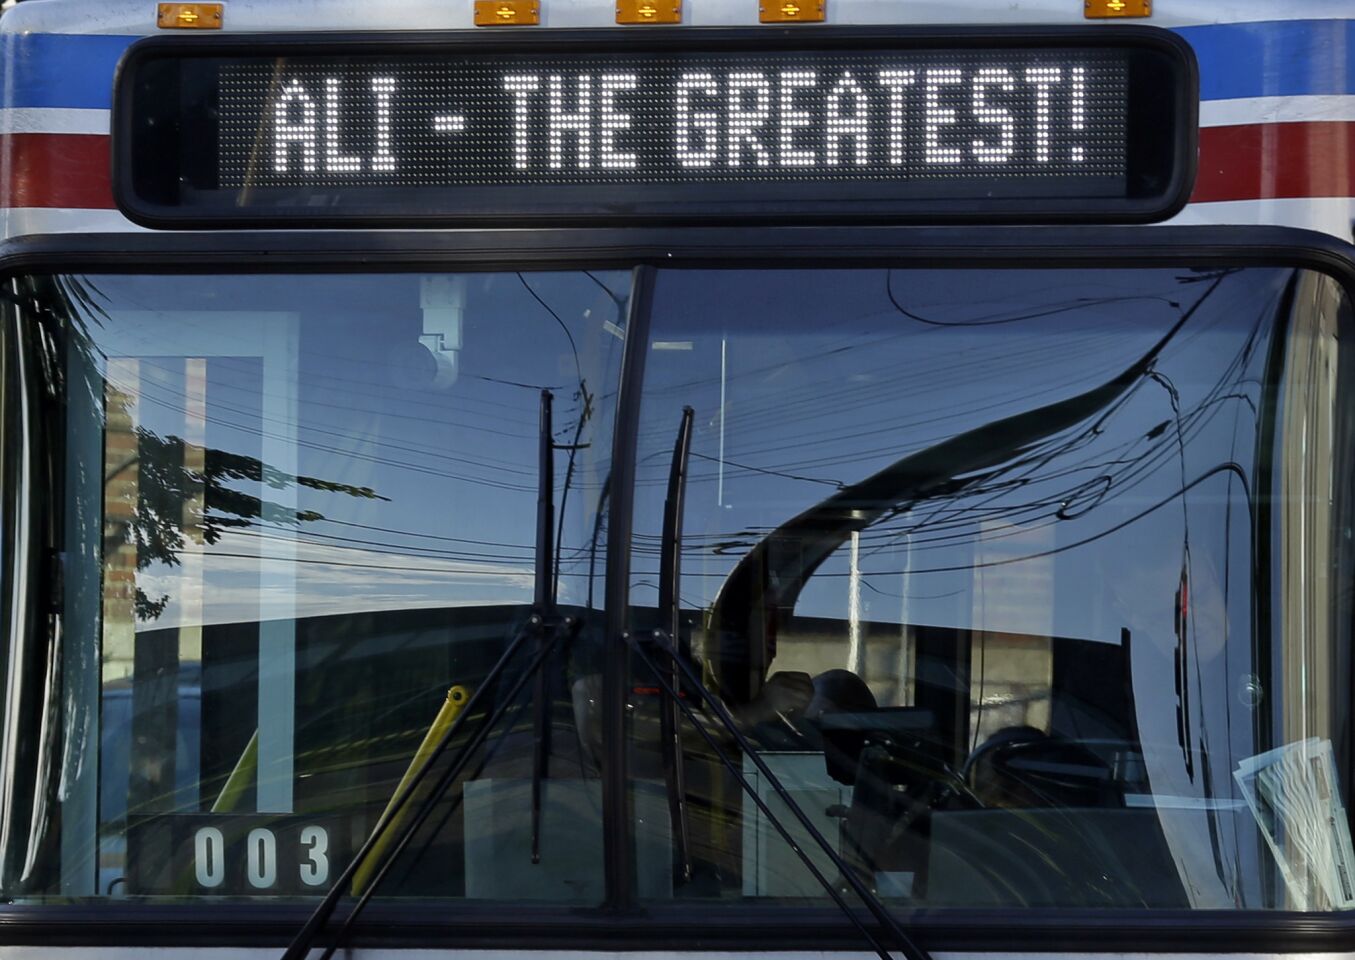 A Louisville bus carries a salute to native son Muhammad Ali.